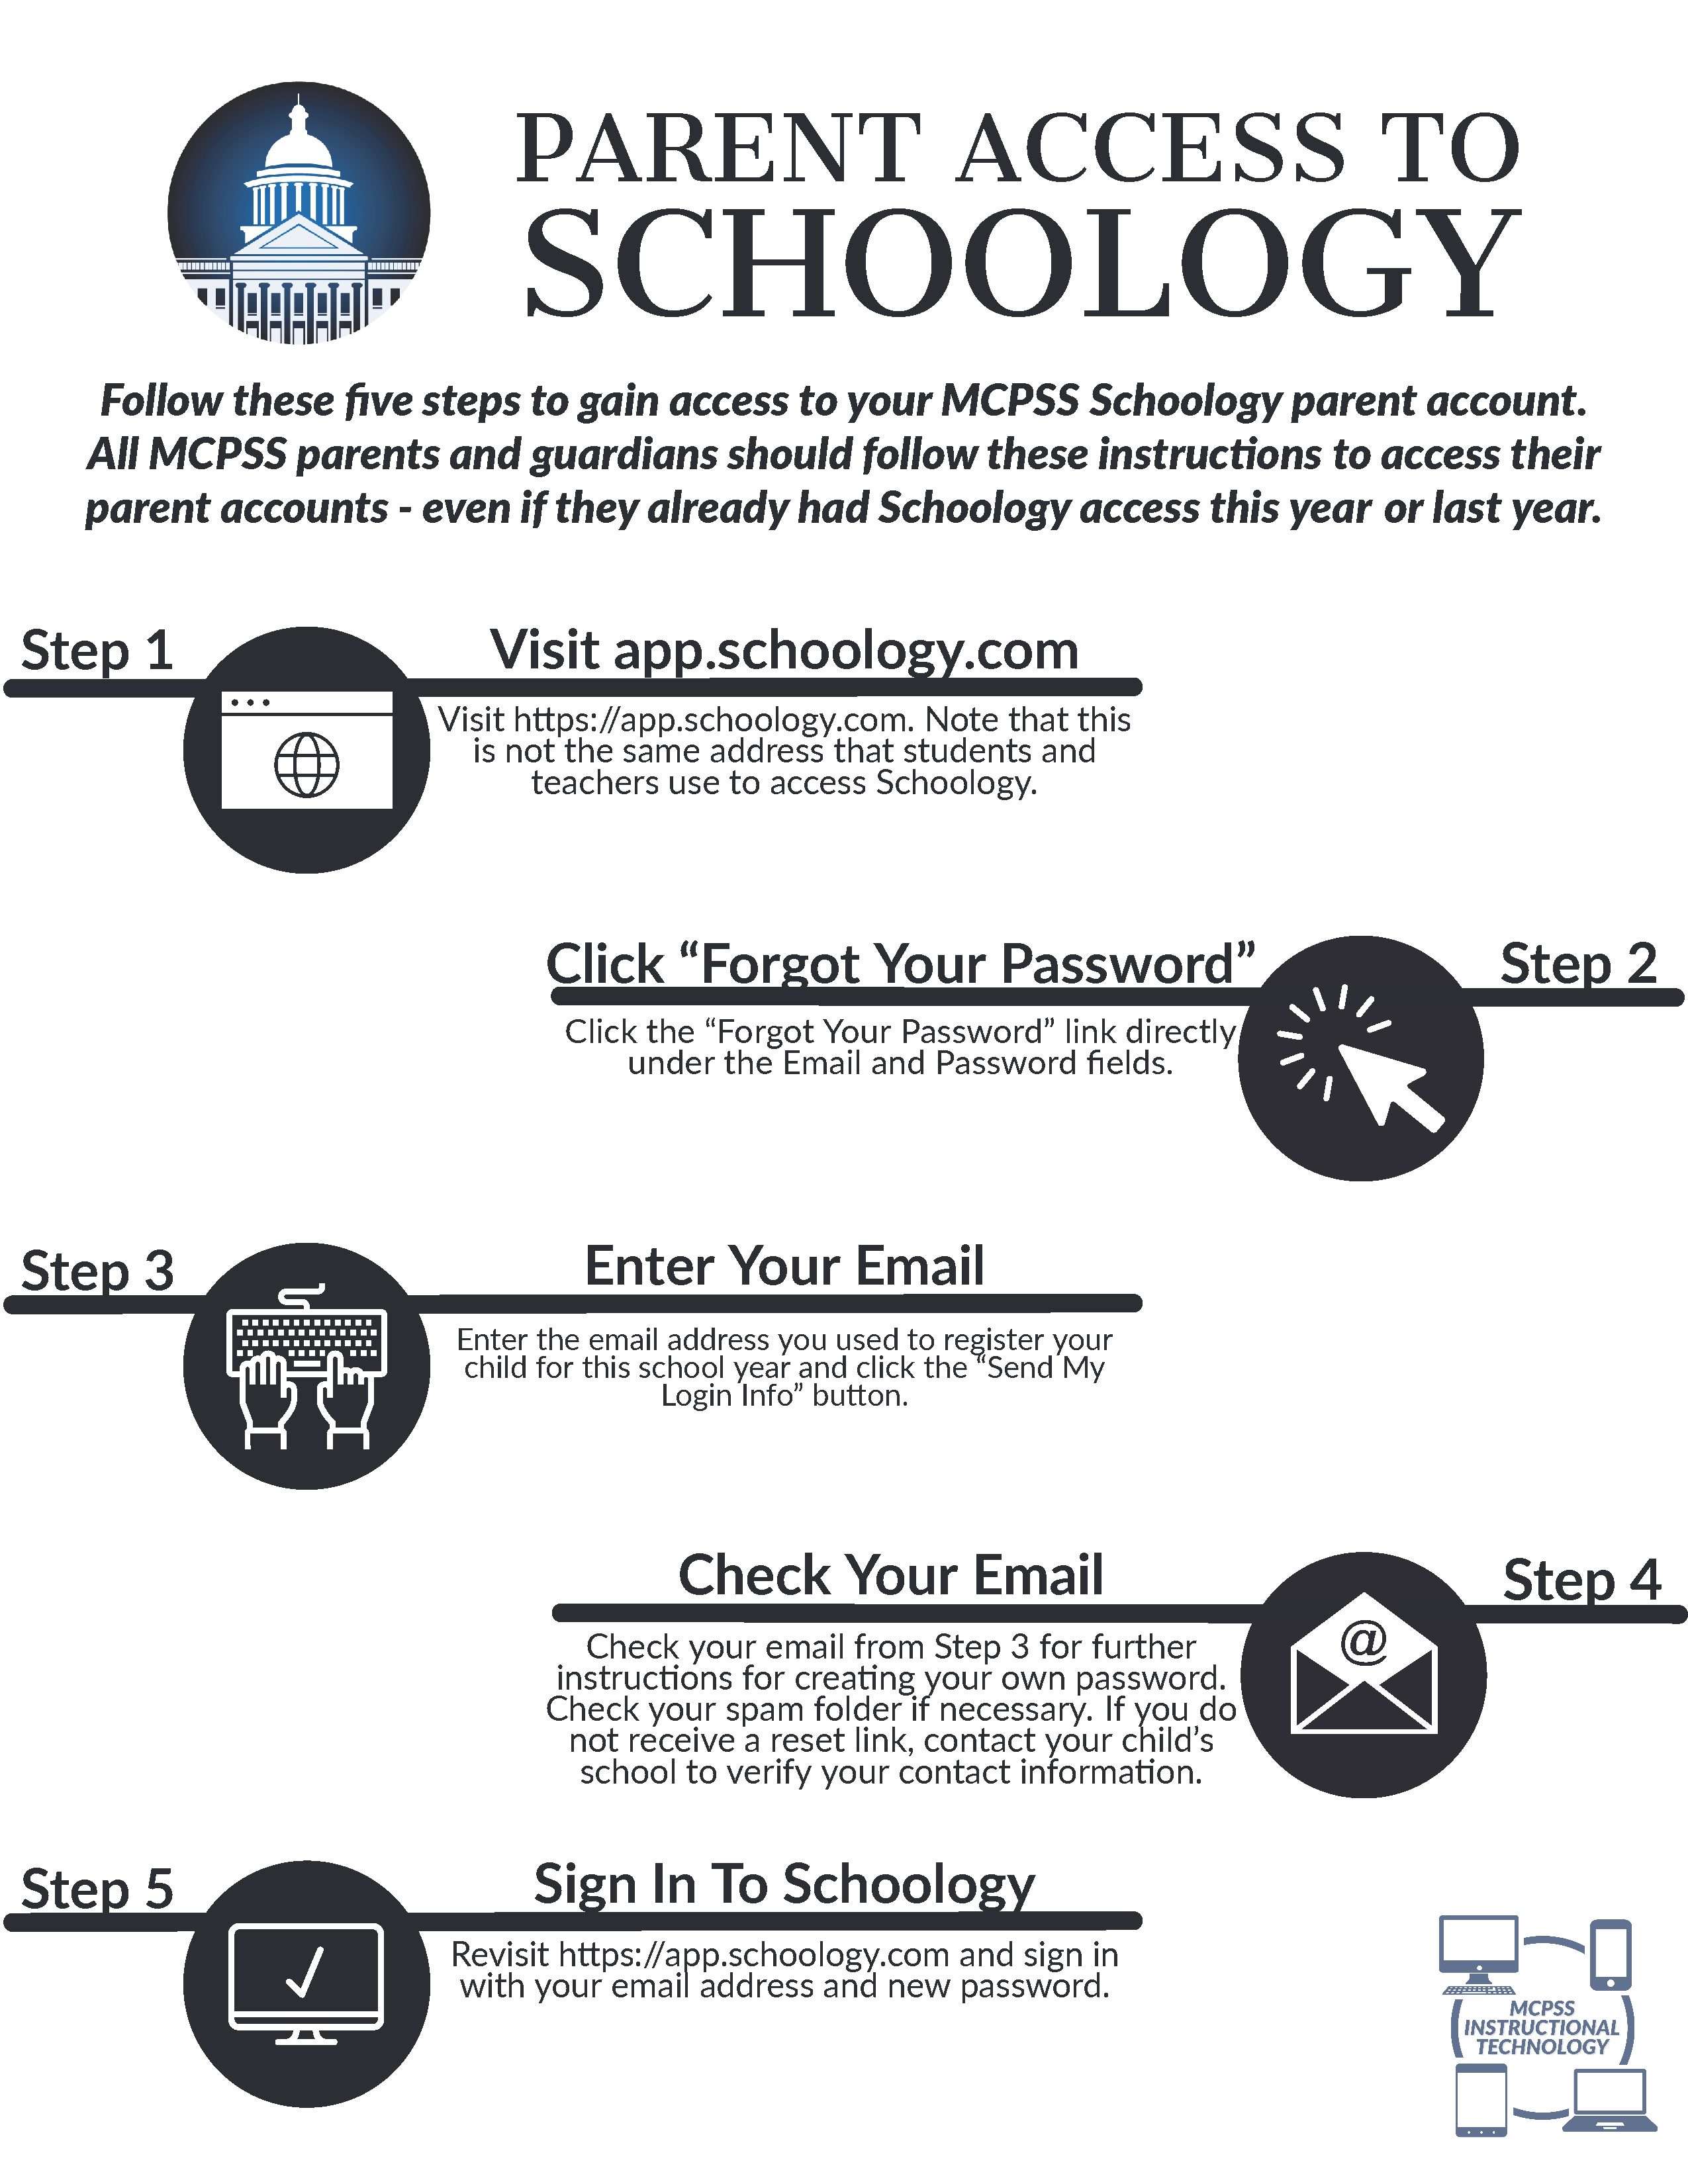 Directions for Parent Access to Schoology